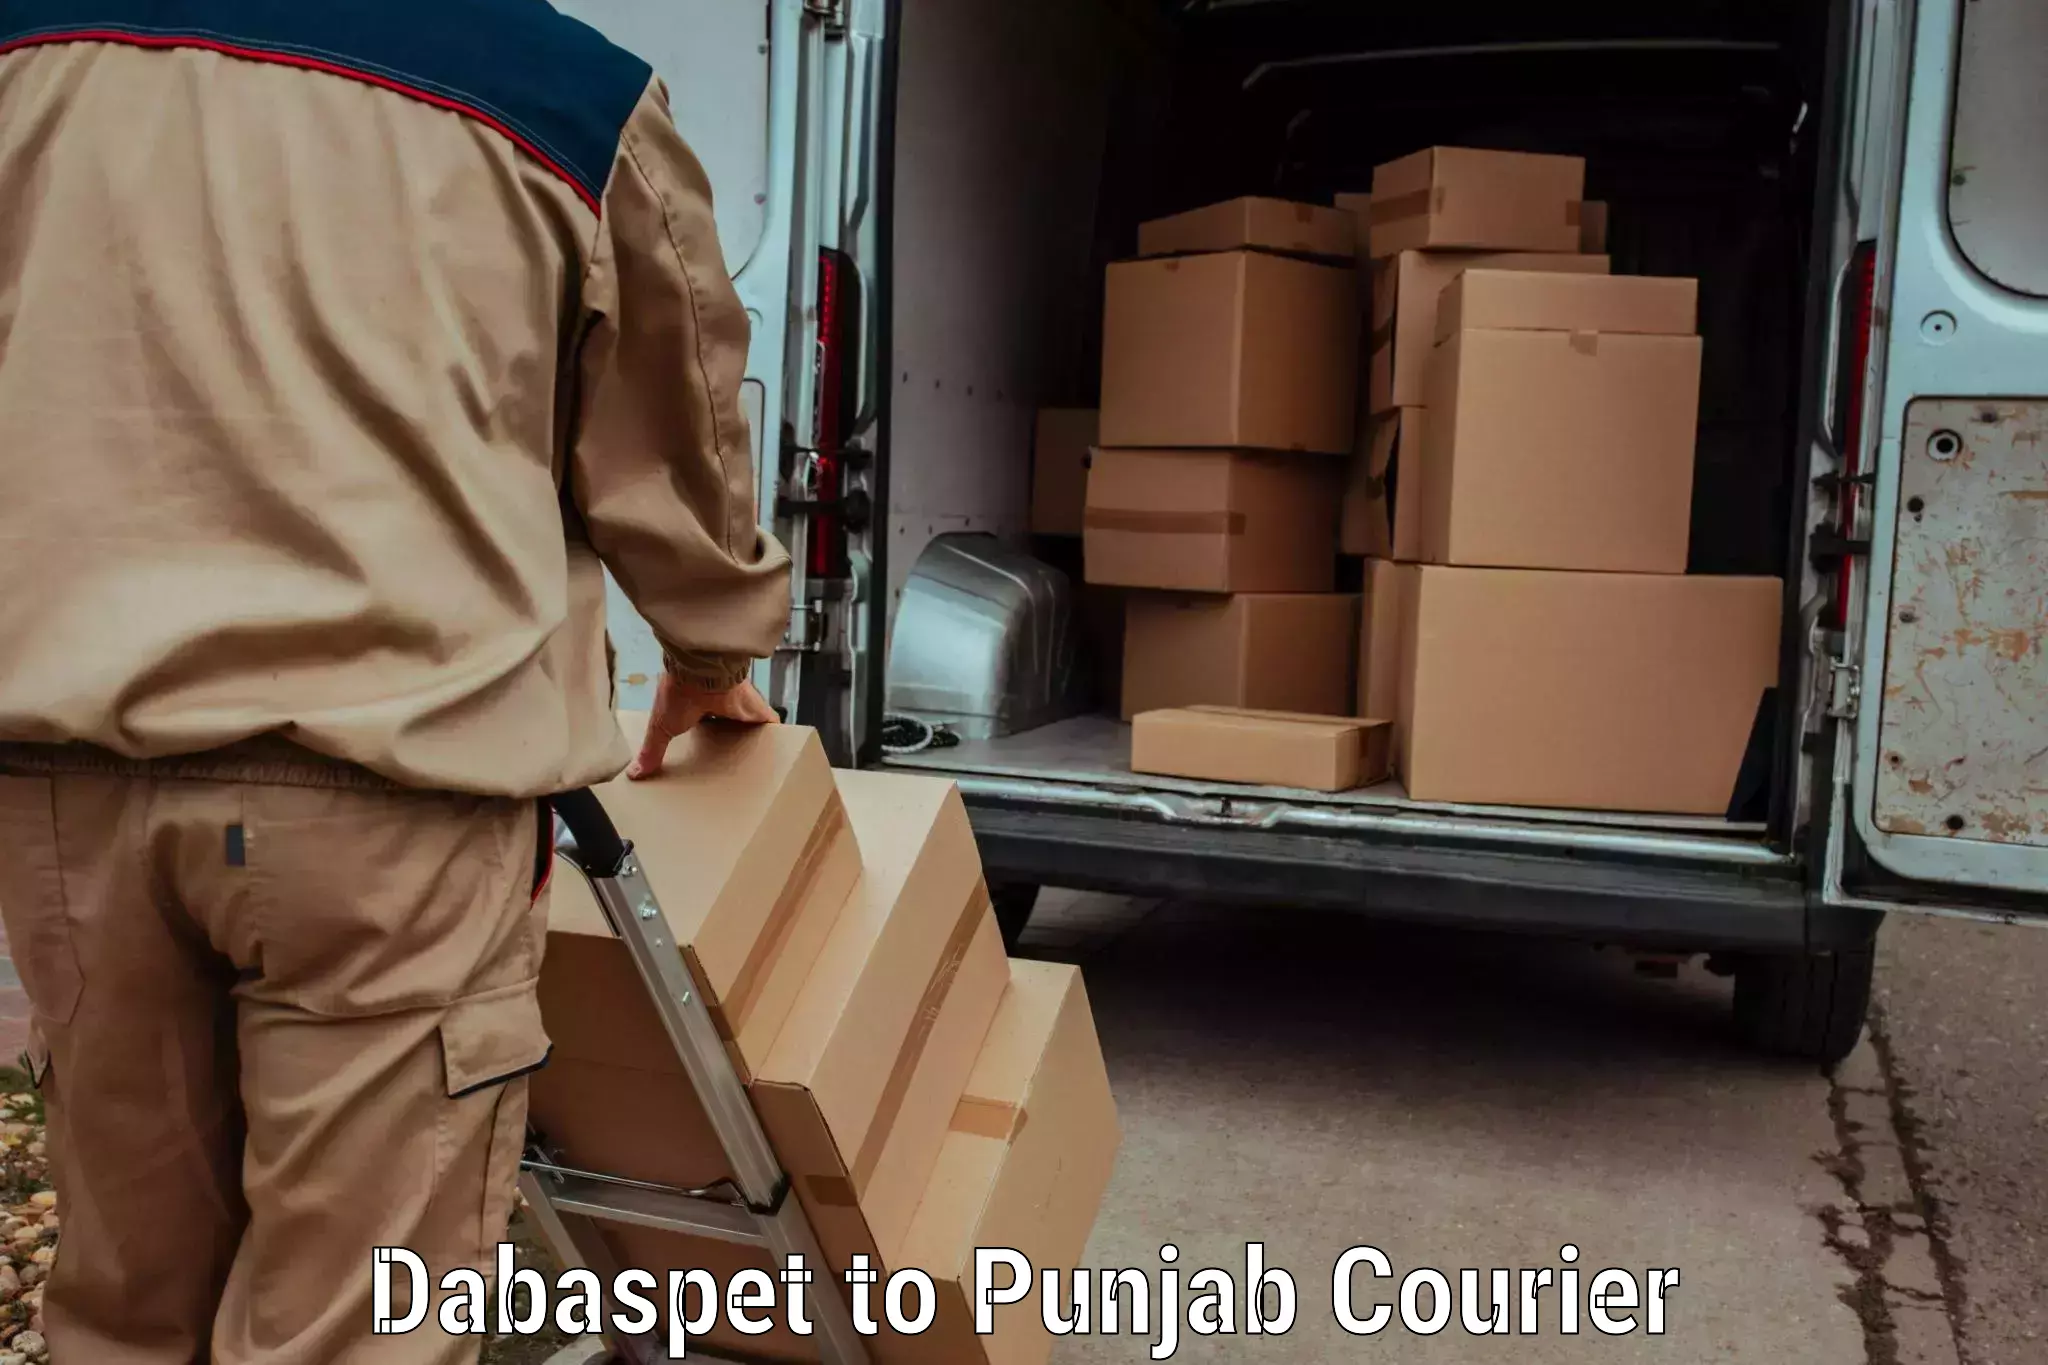 Full-service courier options Dabaspet to Dinanagar